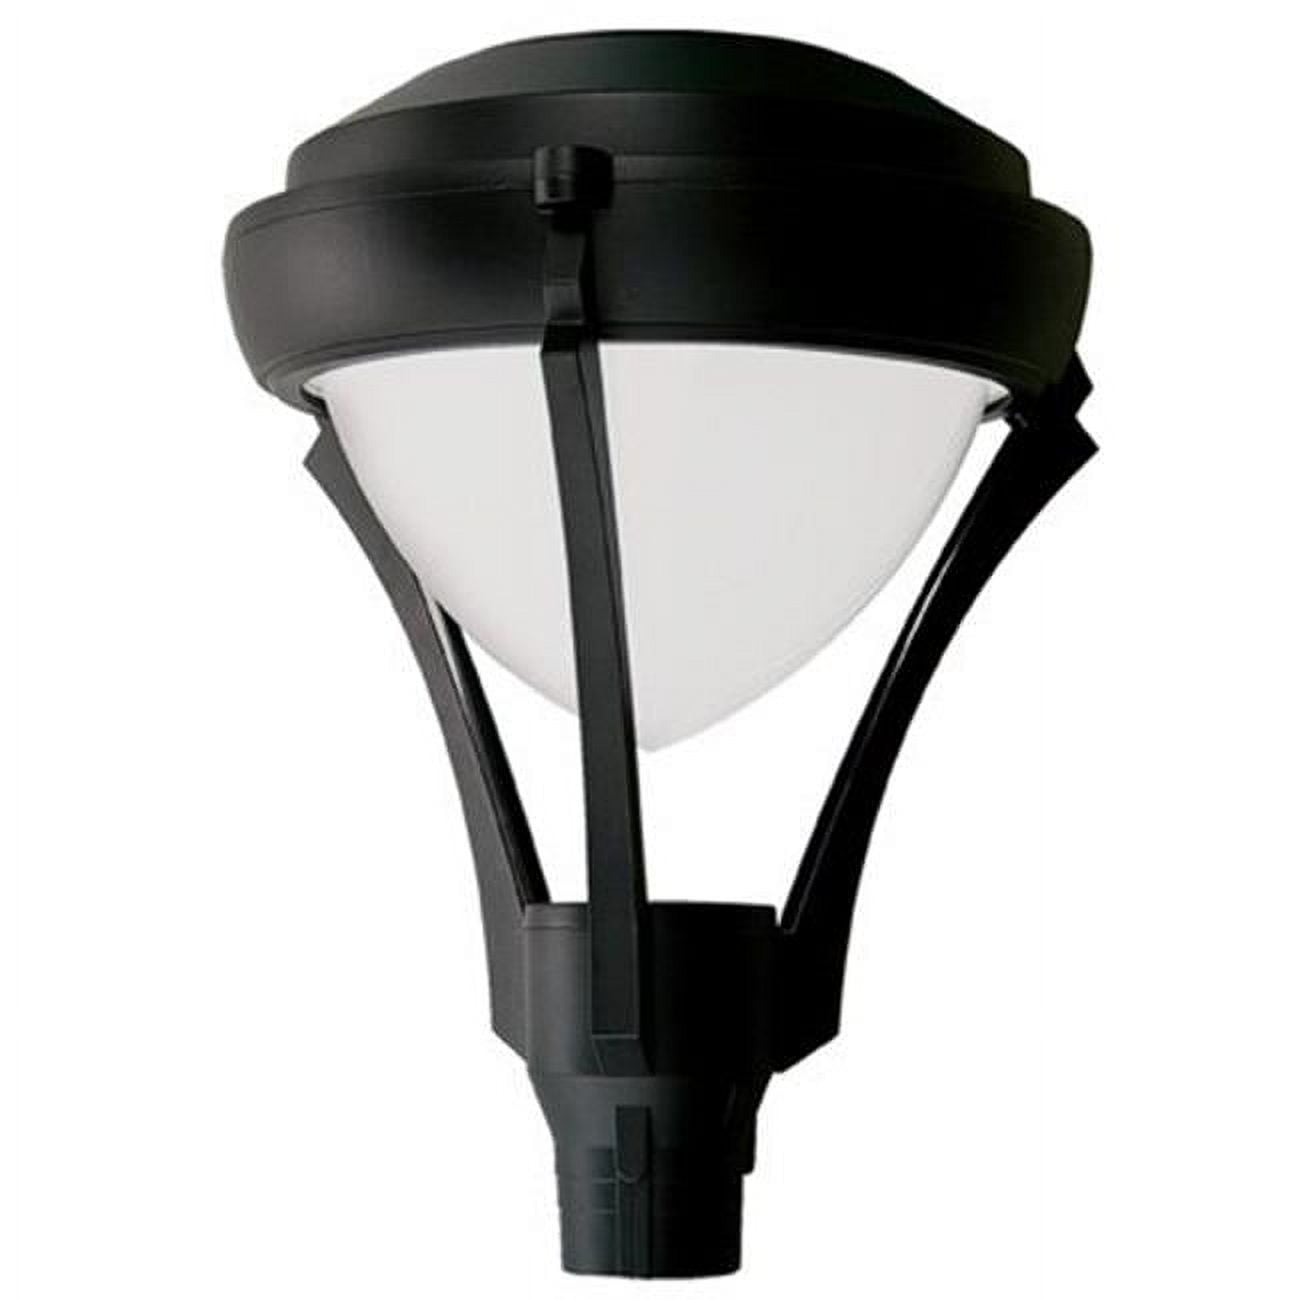 Picture of Dabmar Lighting GM596-B-MT 50W Powder Coated Cast Aluminum Post Top Light Fixture with Metal Halide Lamp, Black - 27.95 x 21.65 x 21.65 in.